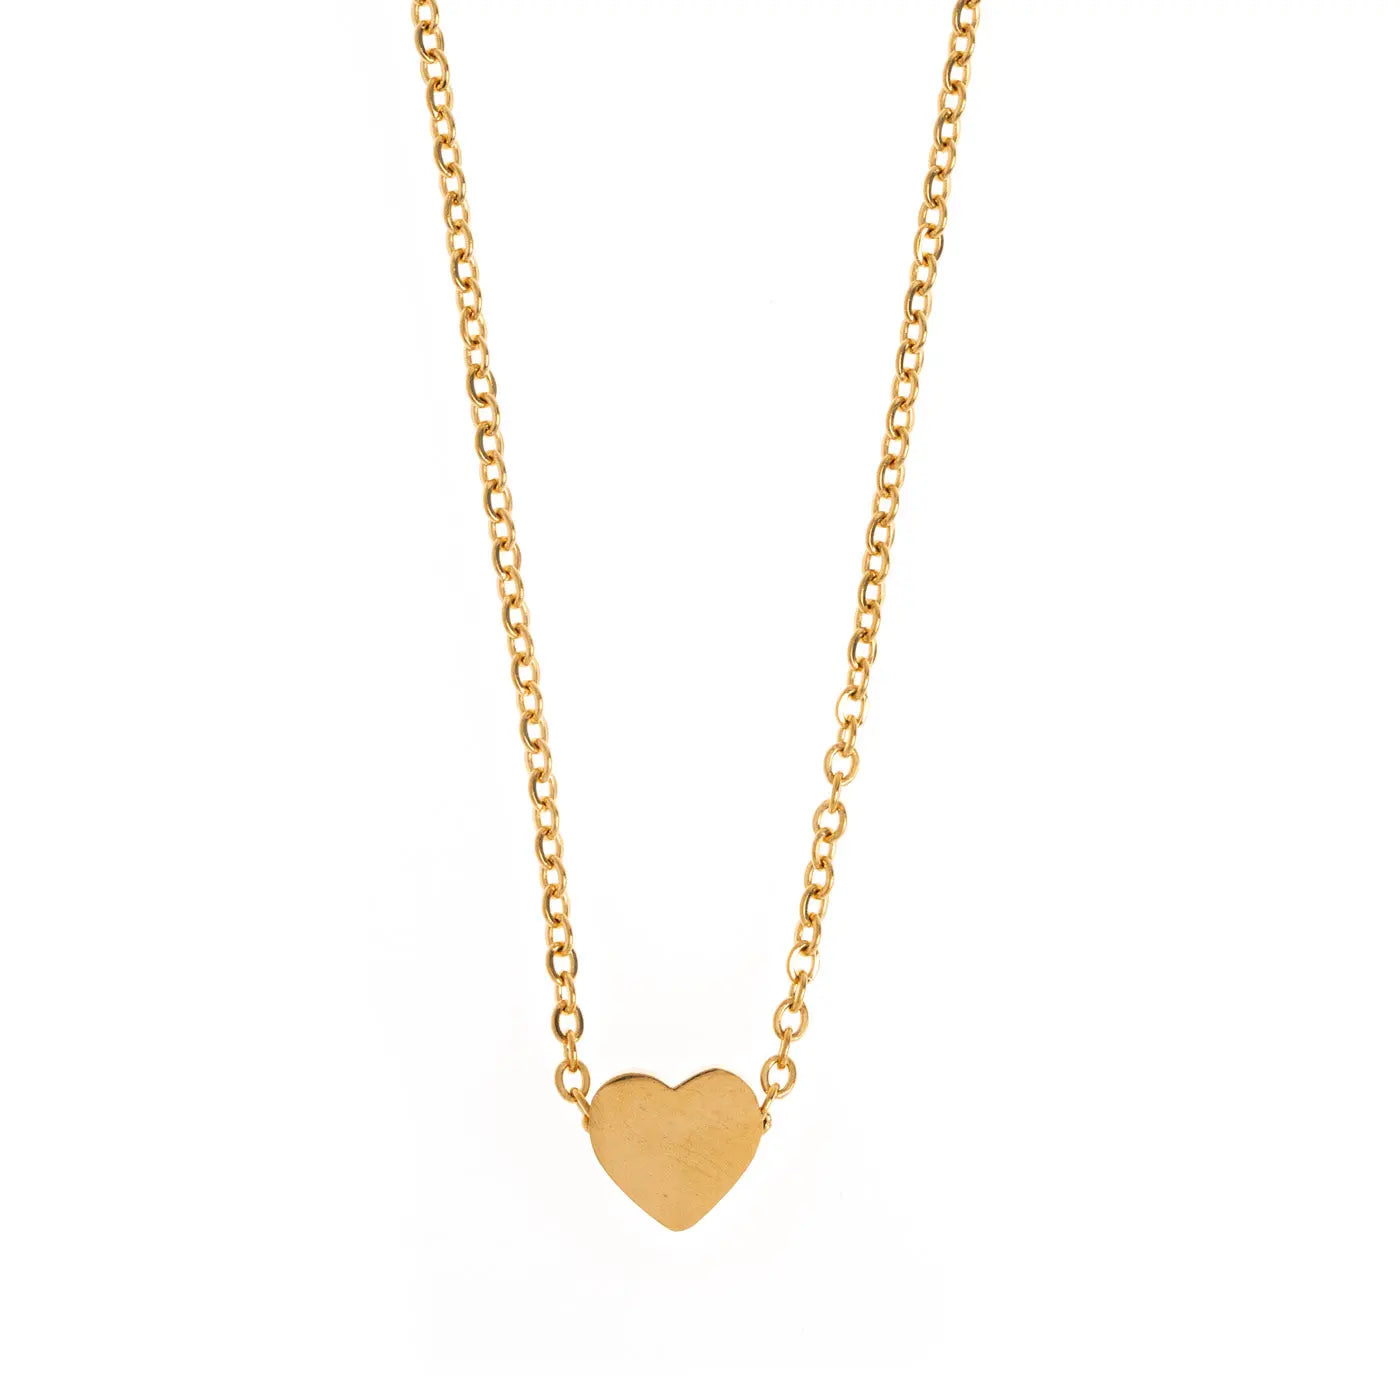 Sarah - Sliding Heart Necklace Stainless Steel